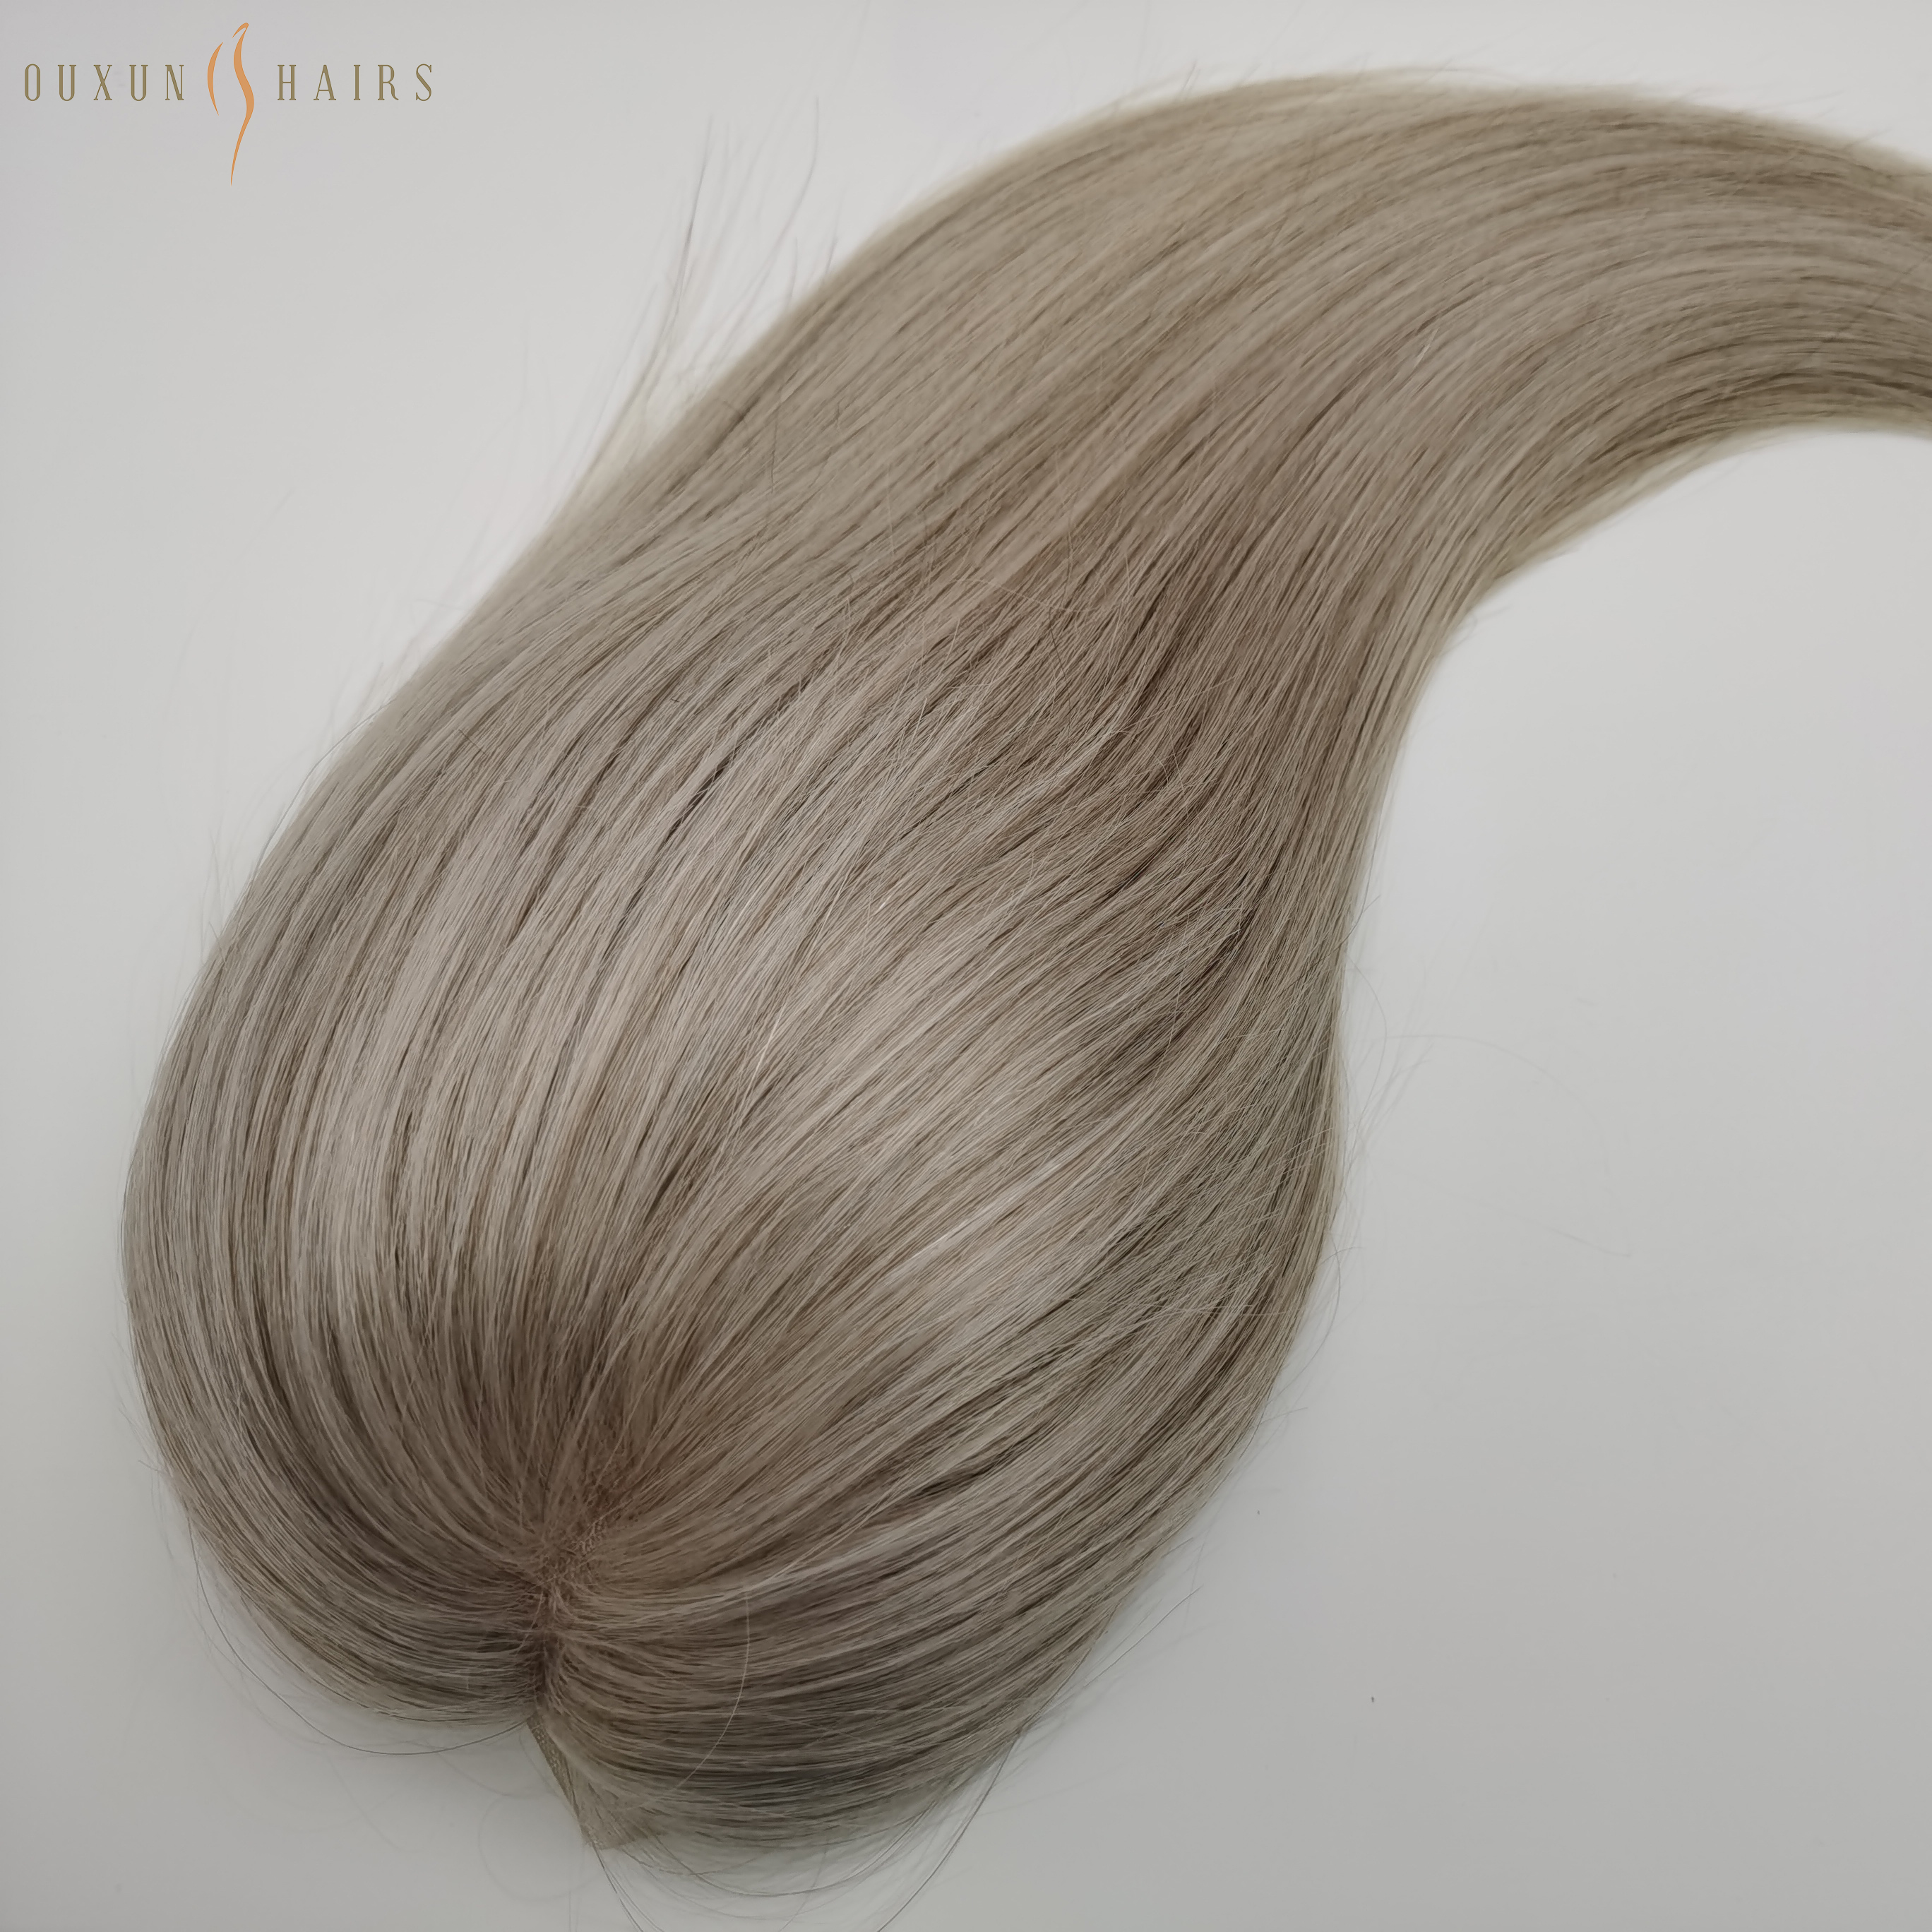 The Luxury Wigs of Miguel Atkins - D Magazine